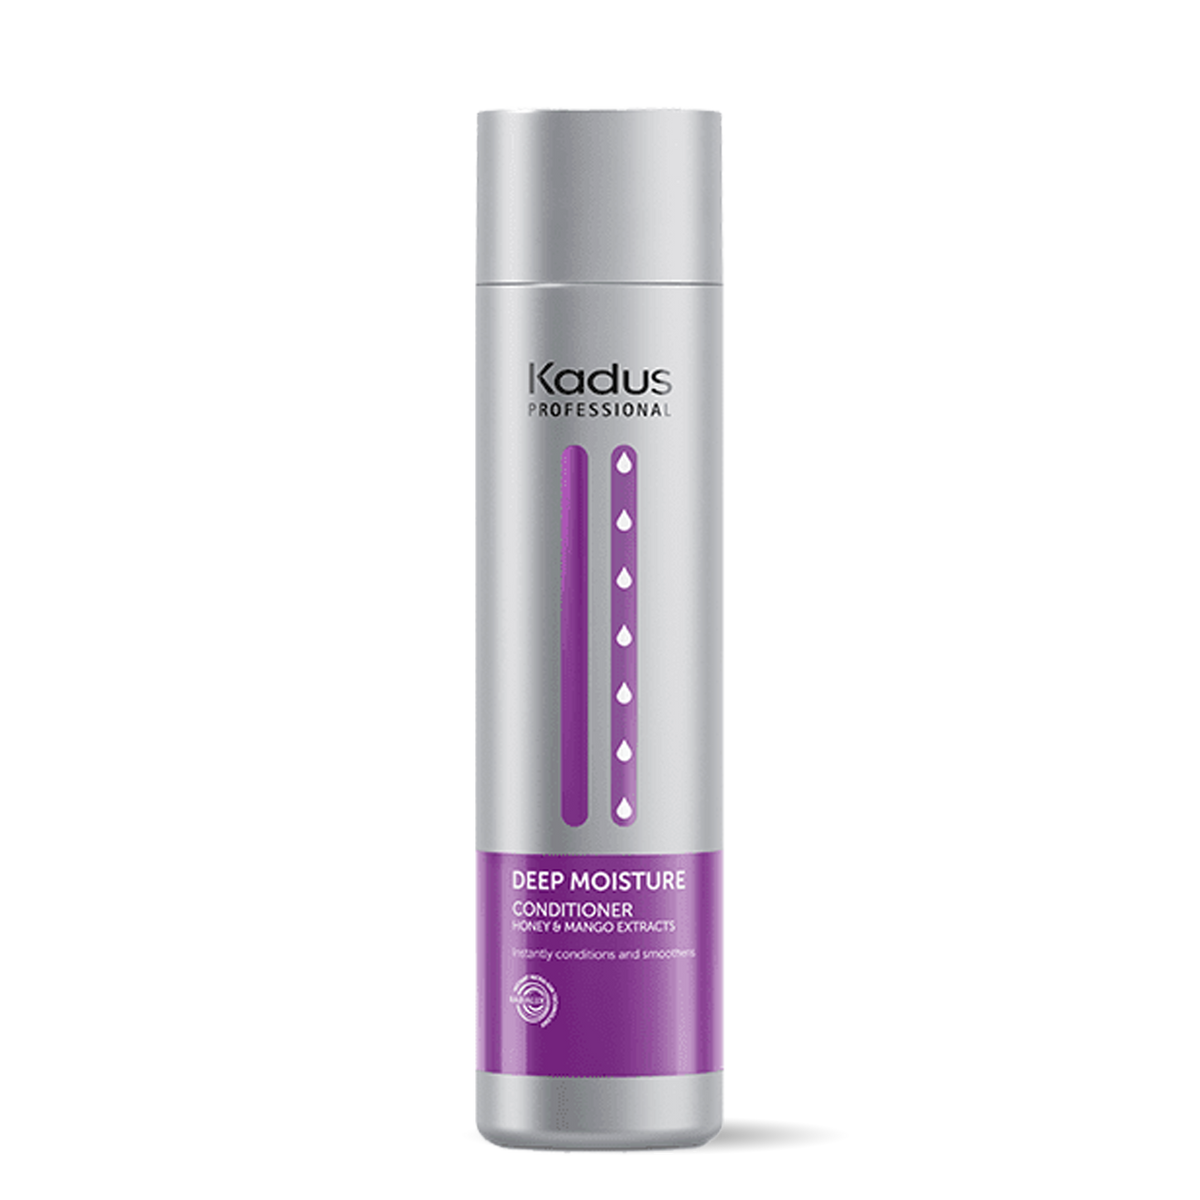 Kadus Deep Moisture Conditioner 250ml - by Kadus Professionals |ProCare Outlet|